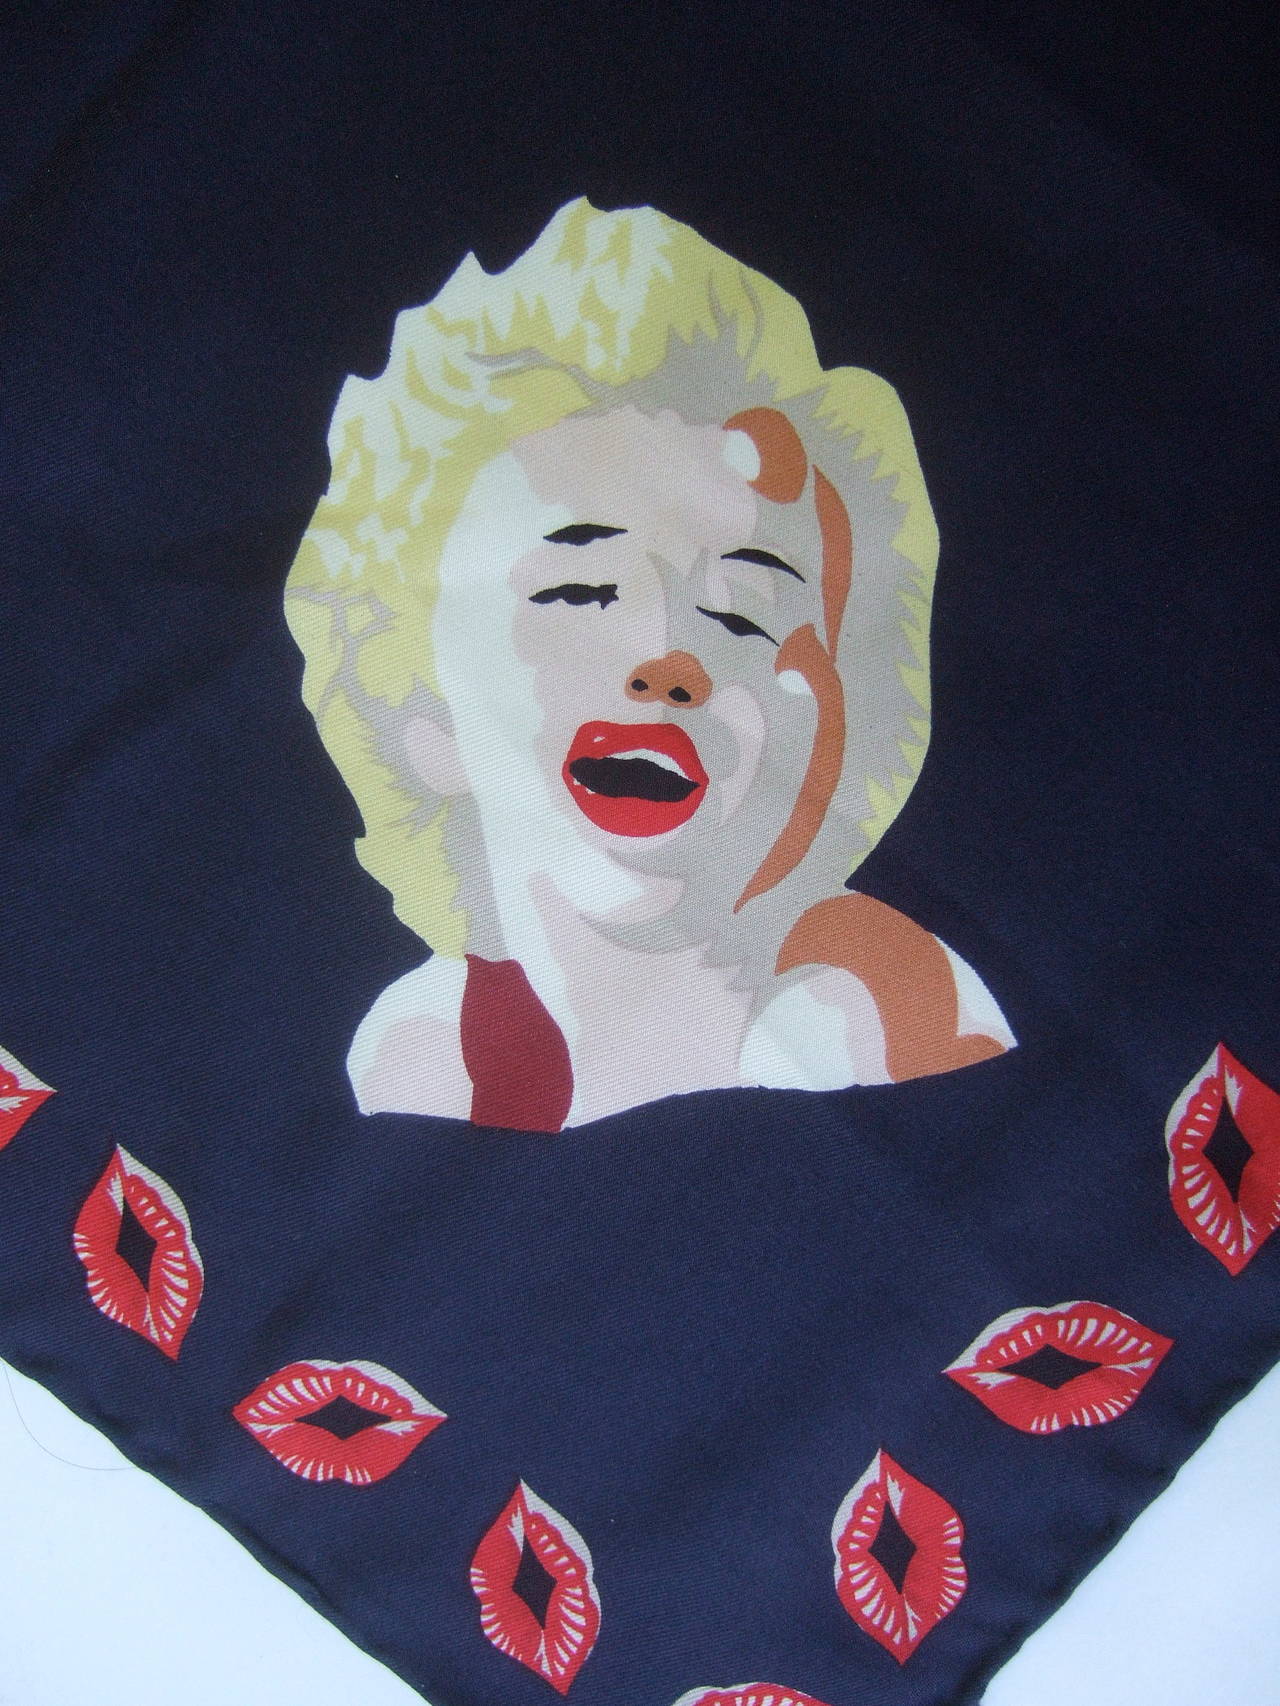 Marilyn Monroe inspired silk pocket scarf Made in Italy c 1990s
The unique hand rolled silk scarf is illustrated with four
silk screen images with the likeness of Marilyn Monroe 

The dark blue silk background is framed with puckered 
red lids